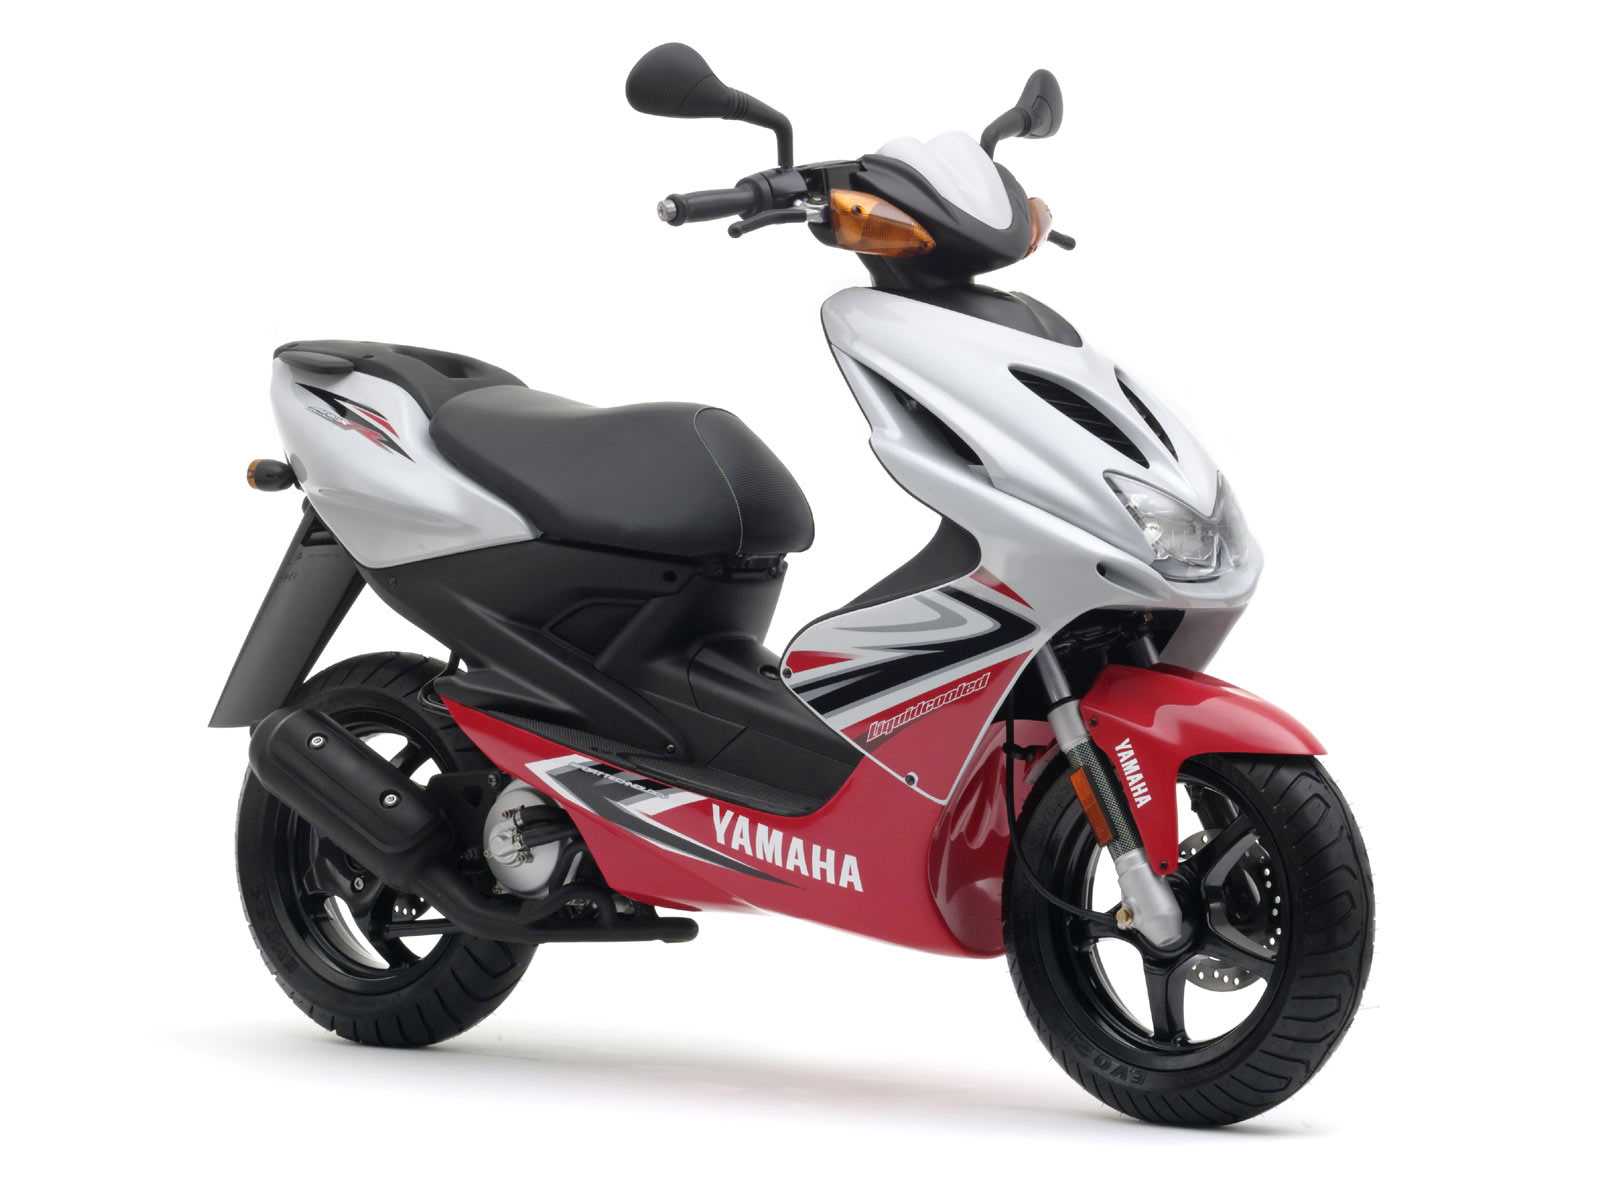 2008 YAMAHA Aerox R Scooter pictures, specifications